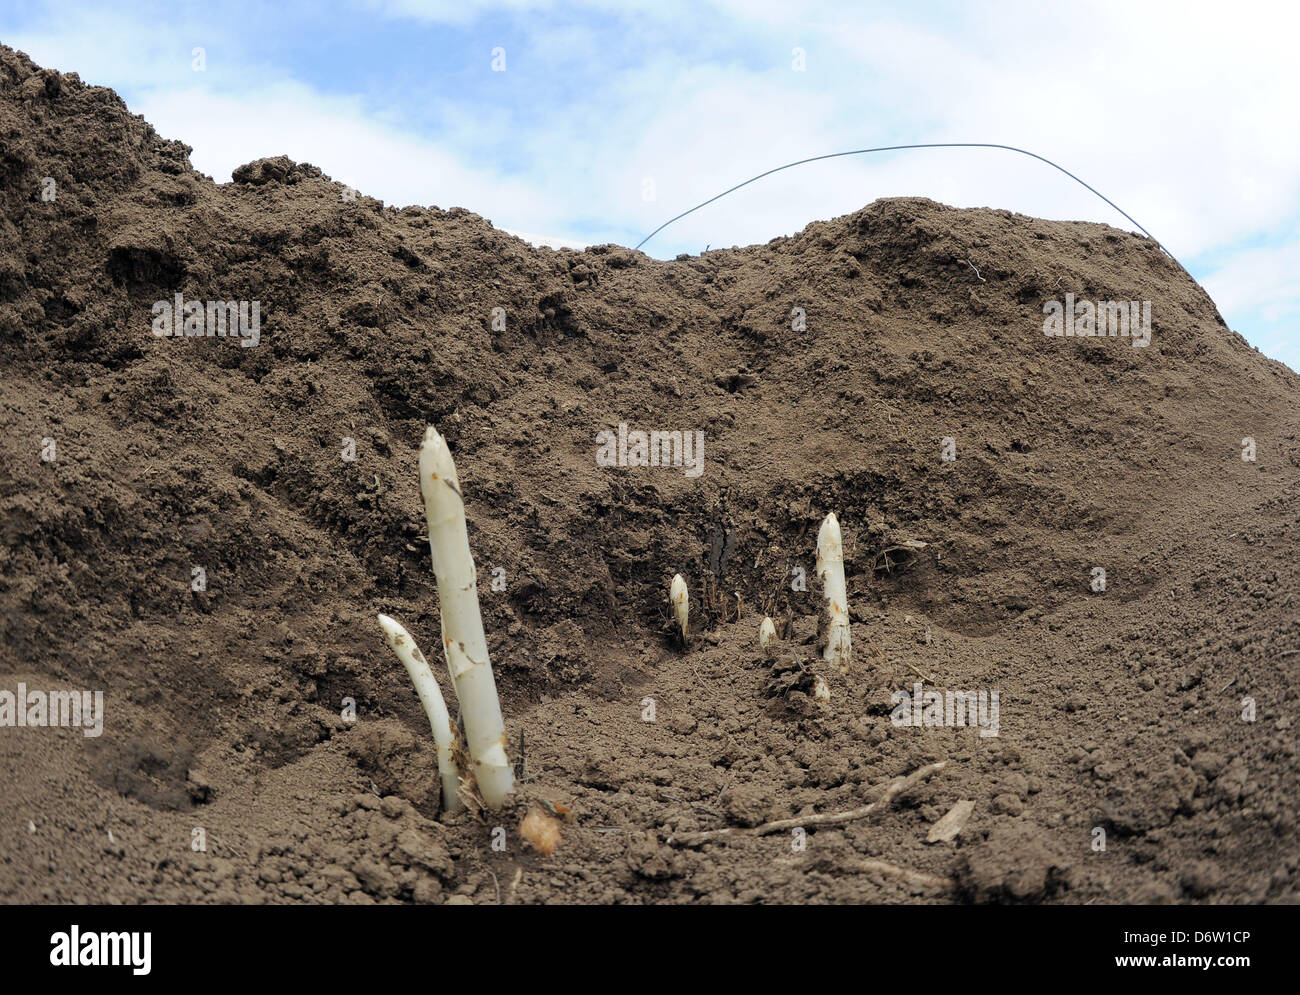 Kyhna, Germany, 23 April 2013.The current growth of the asparagus is seen on an exposed ridge of asparagus in Kutzleben, Germany, 23 April 2013. Asparagus farmers are hoping that the harvest of the first asparagus can start on the weekend. Photo: BERND SETTNIK/DPA/Alamy Live News Stock Photo